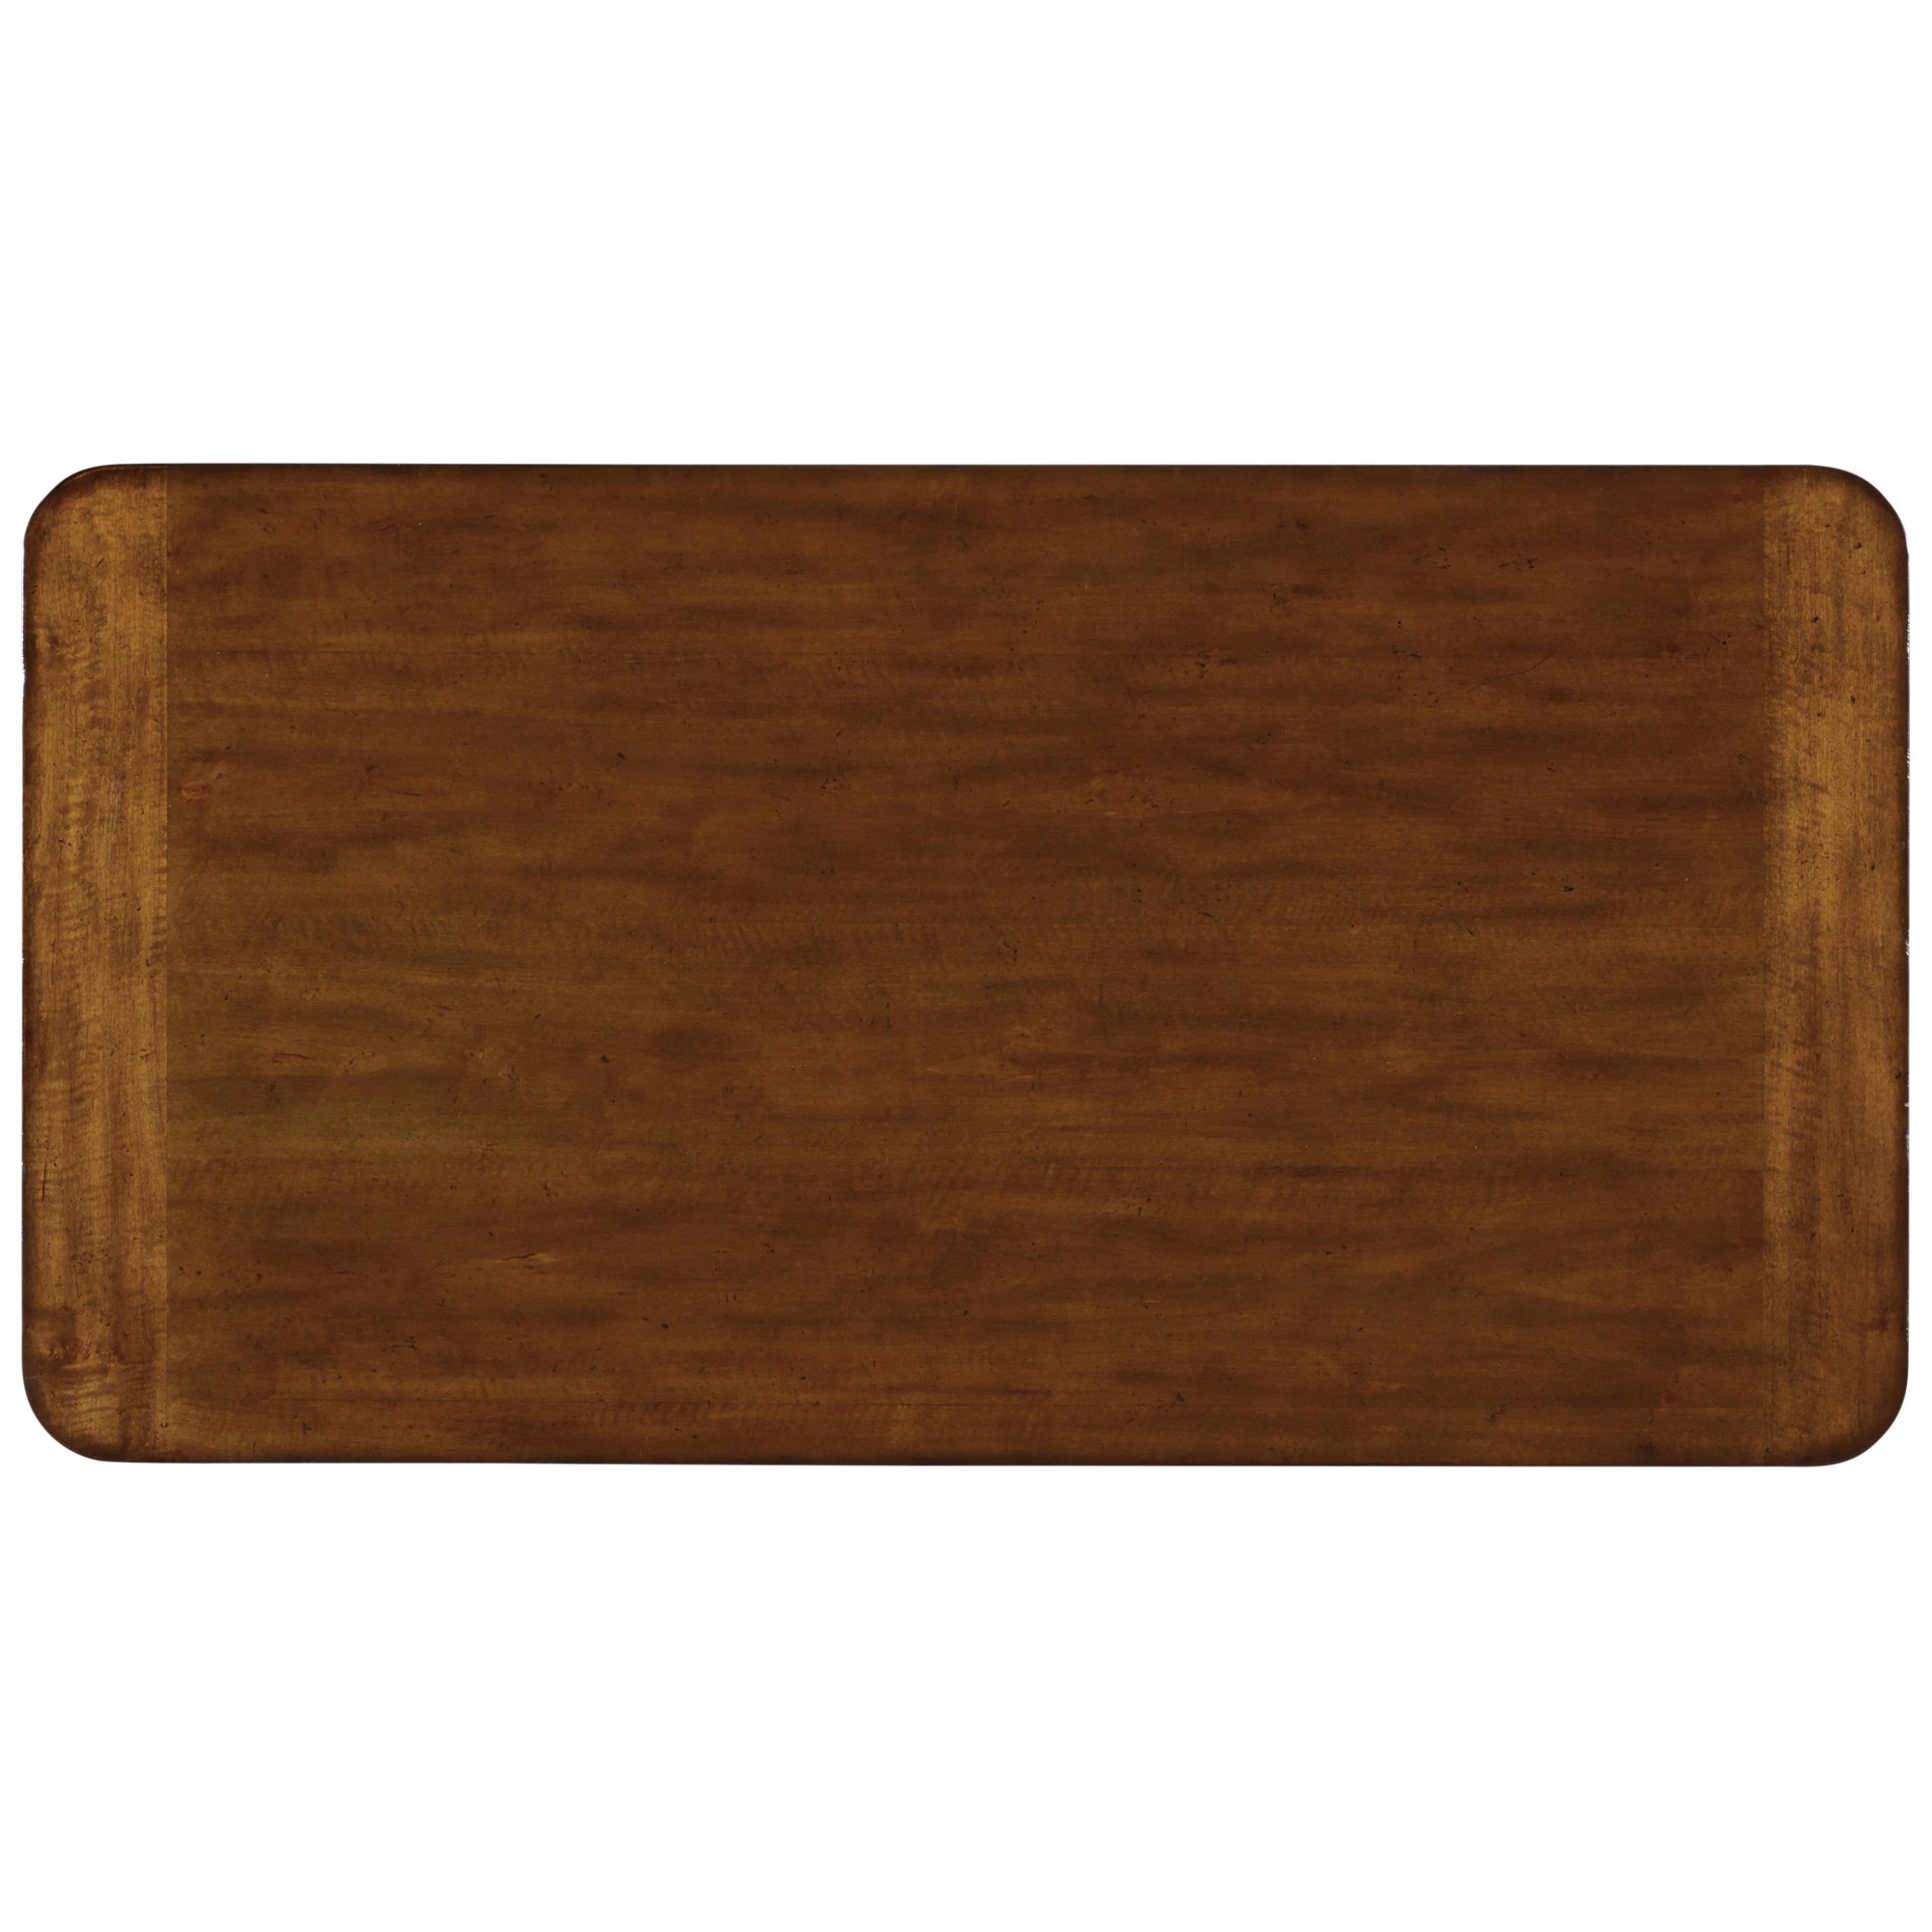 Is Alder Good For Cutting Boards - Virginia Boys Kitchens